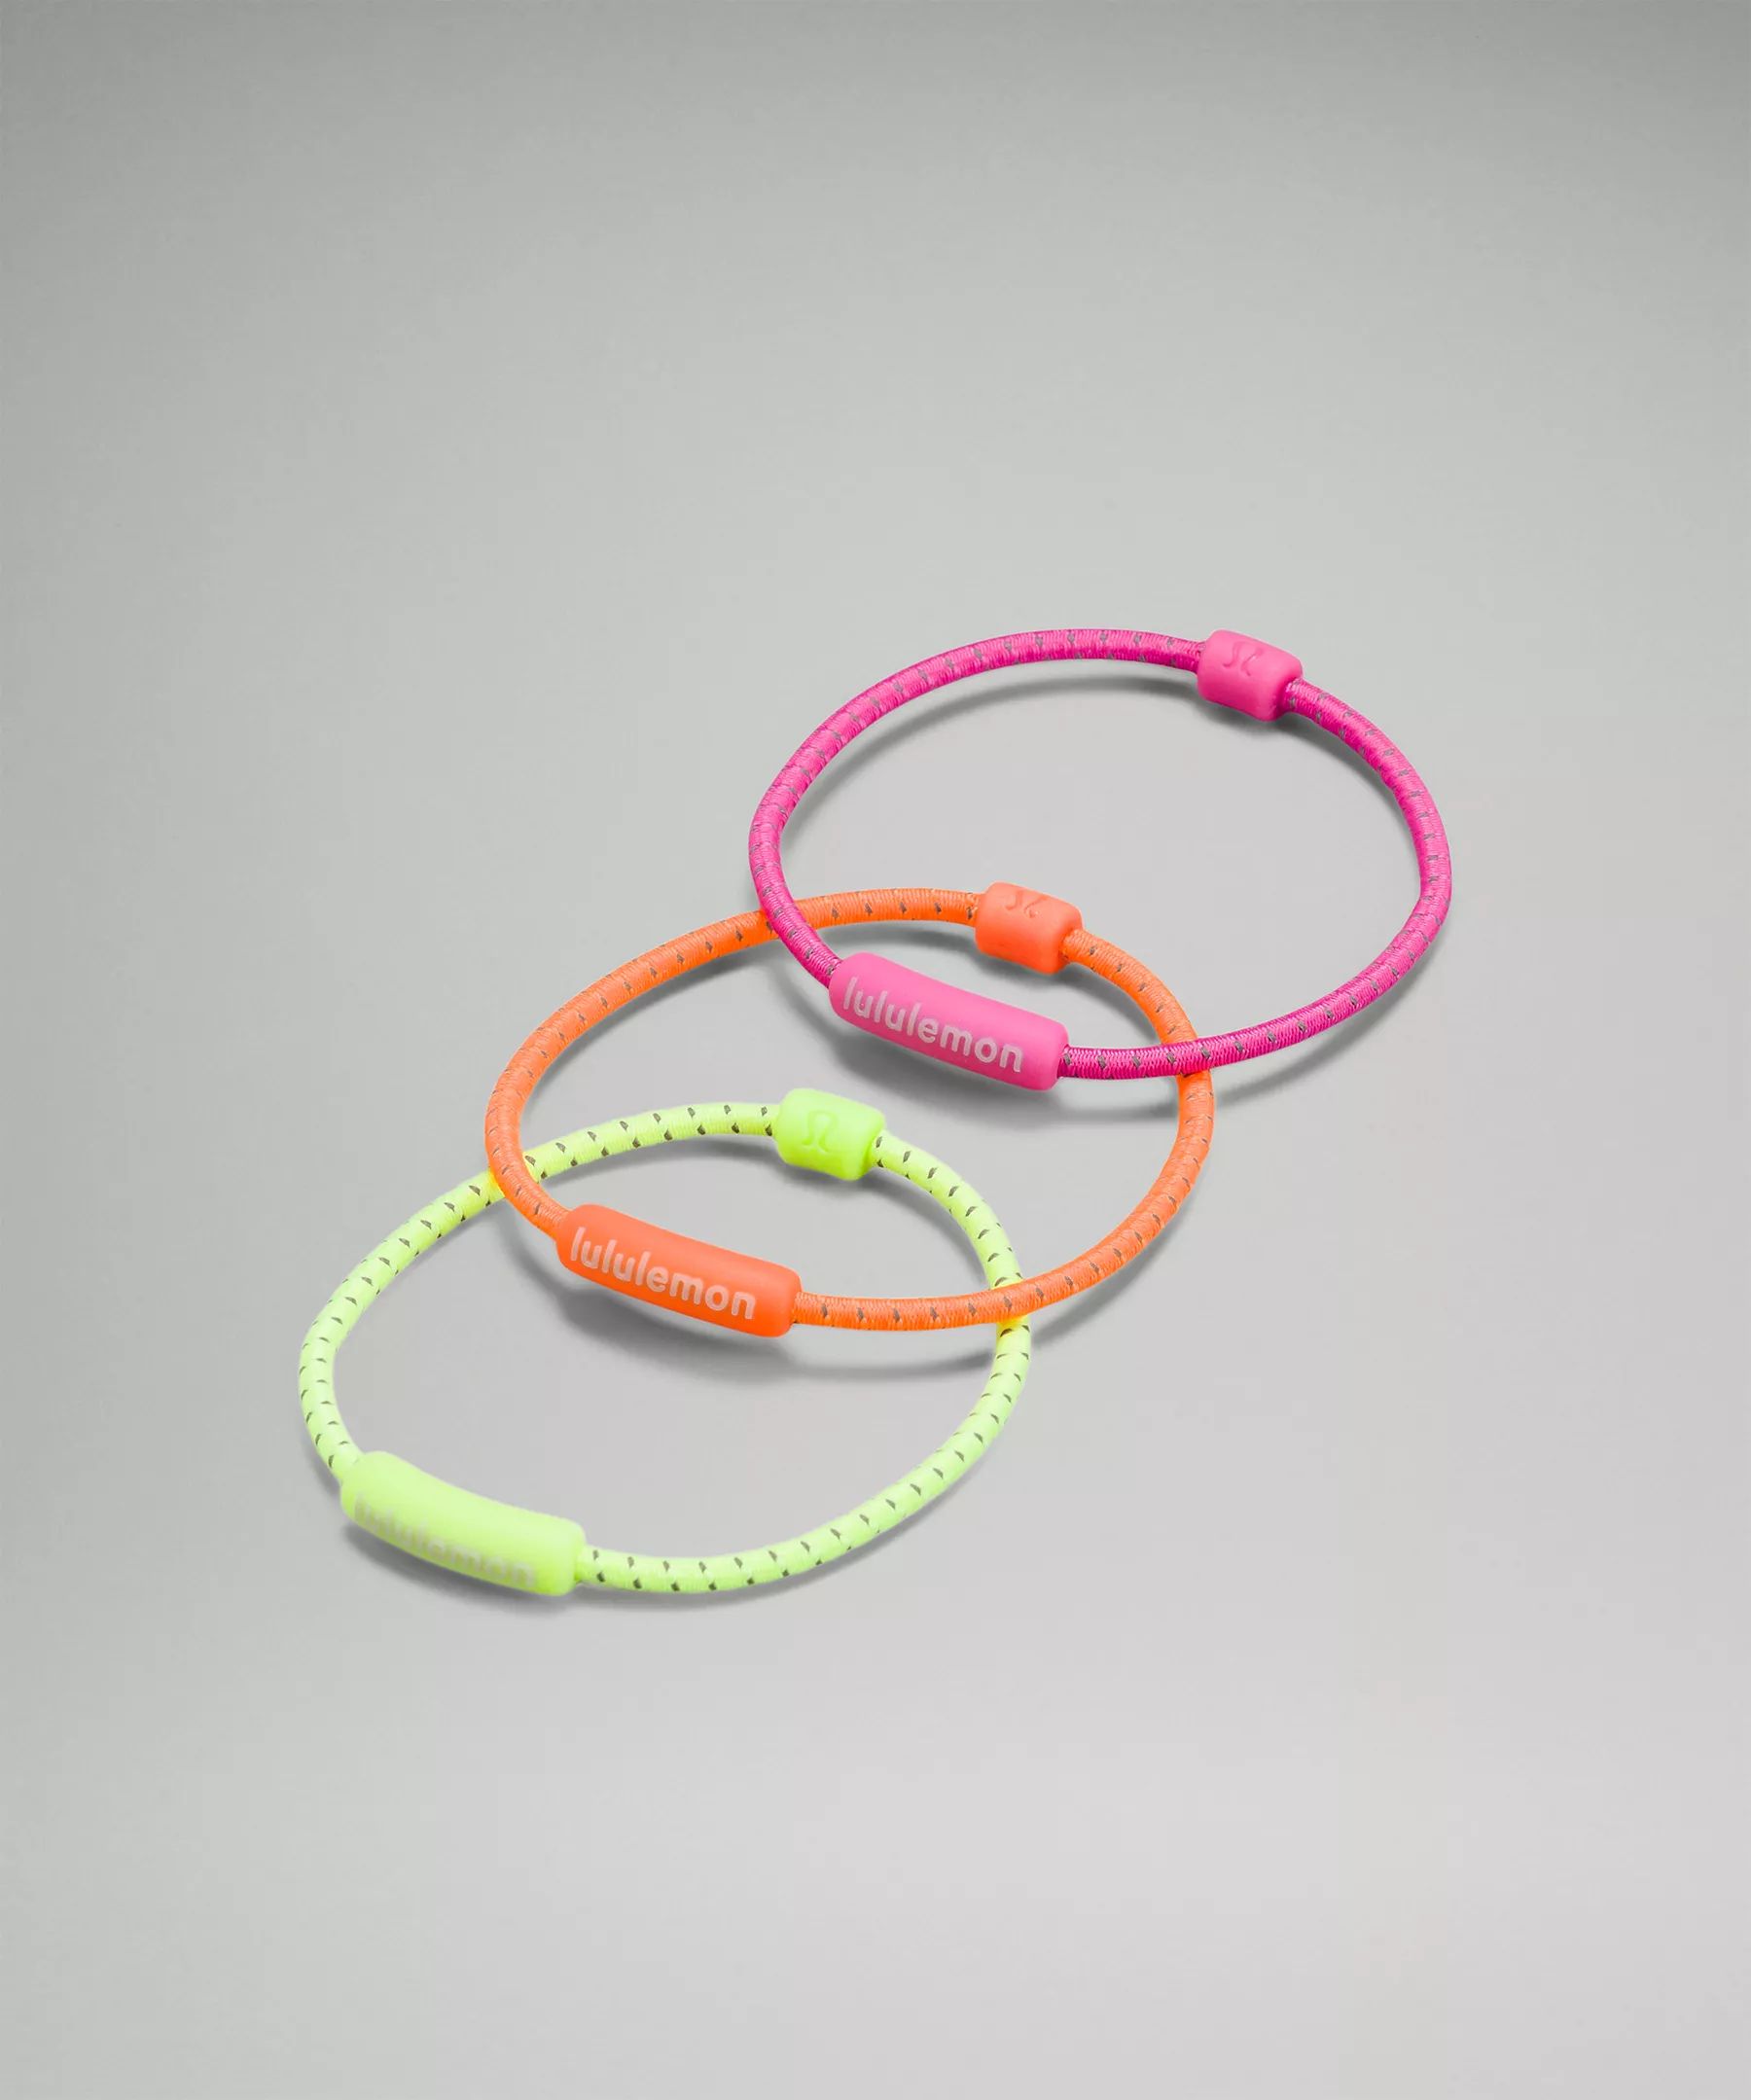 Silicone Hair Ties 3 PackFinal SaleYou can return in-store for creditLearn more | Lululemon (US)